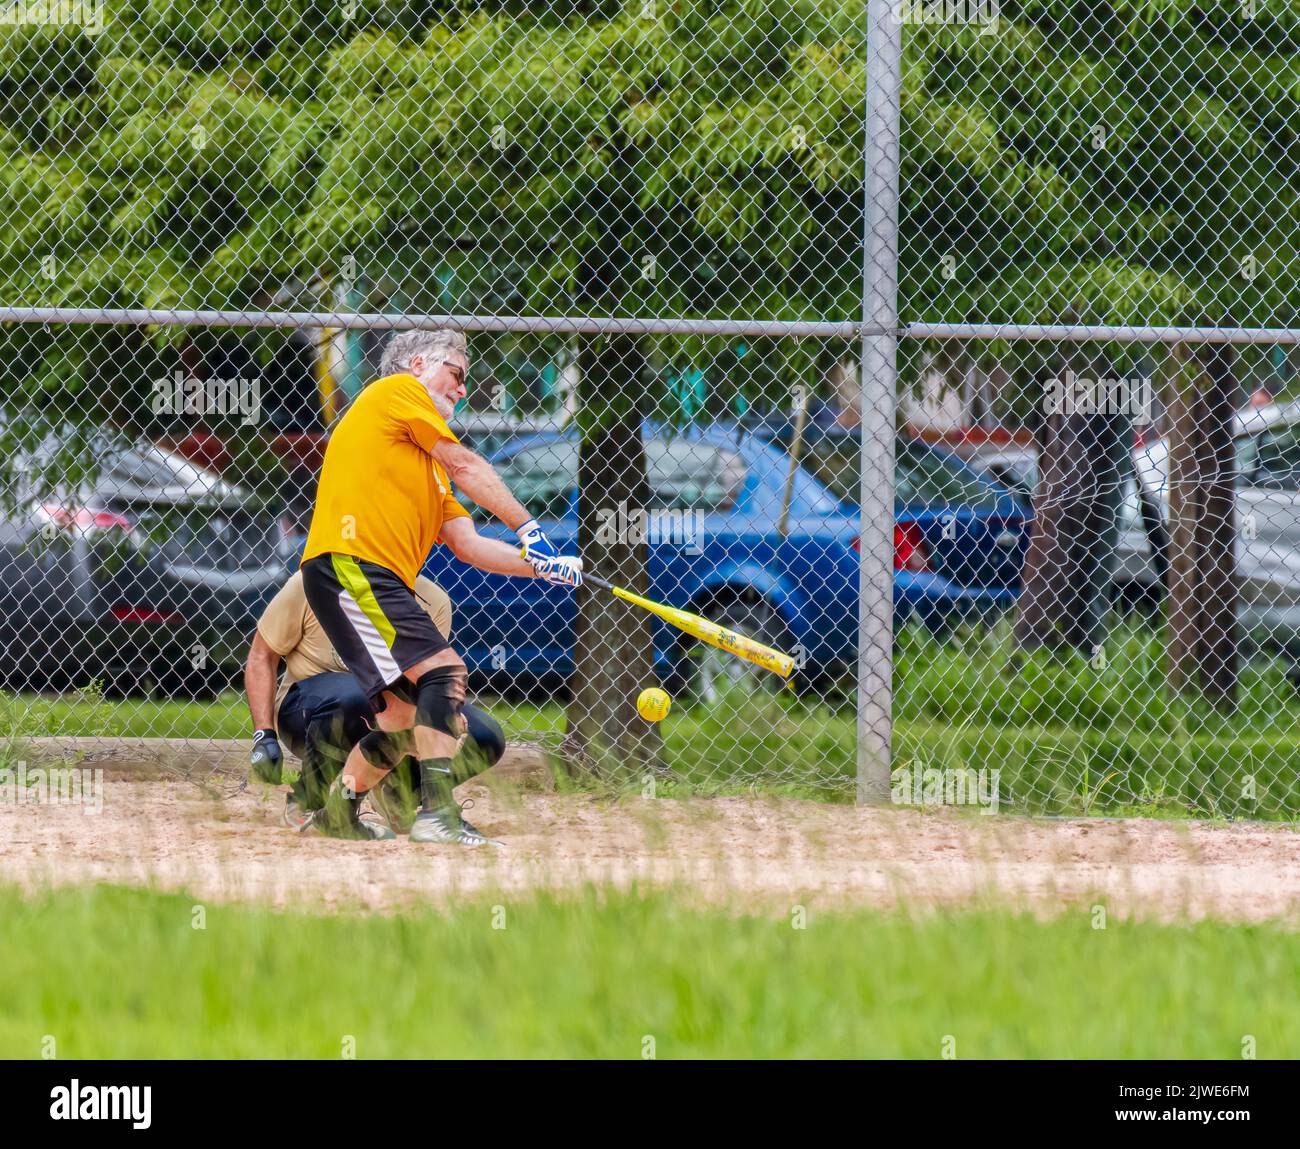 NEW ORLEANS, LA, USA - AUGUST 11, 2019: Softball batter swings and misses at pitched softball Stock Photo